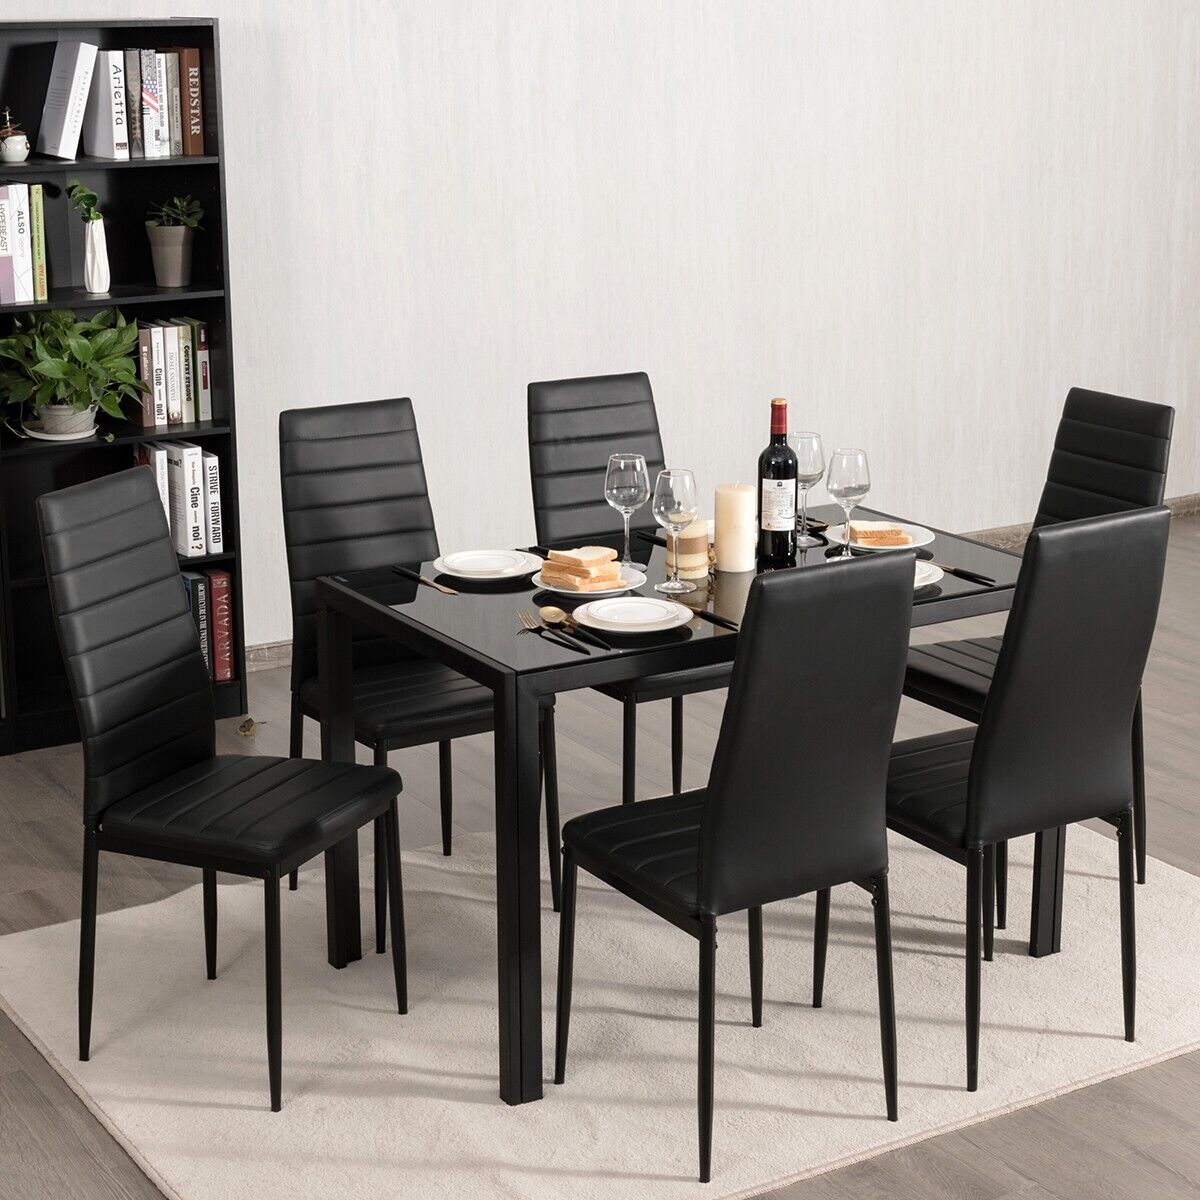 Set of 6 High Back Dining Chairs with Metal Legs and Foot Pads